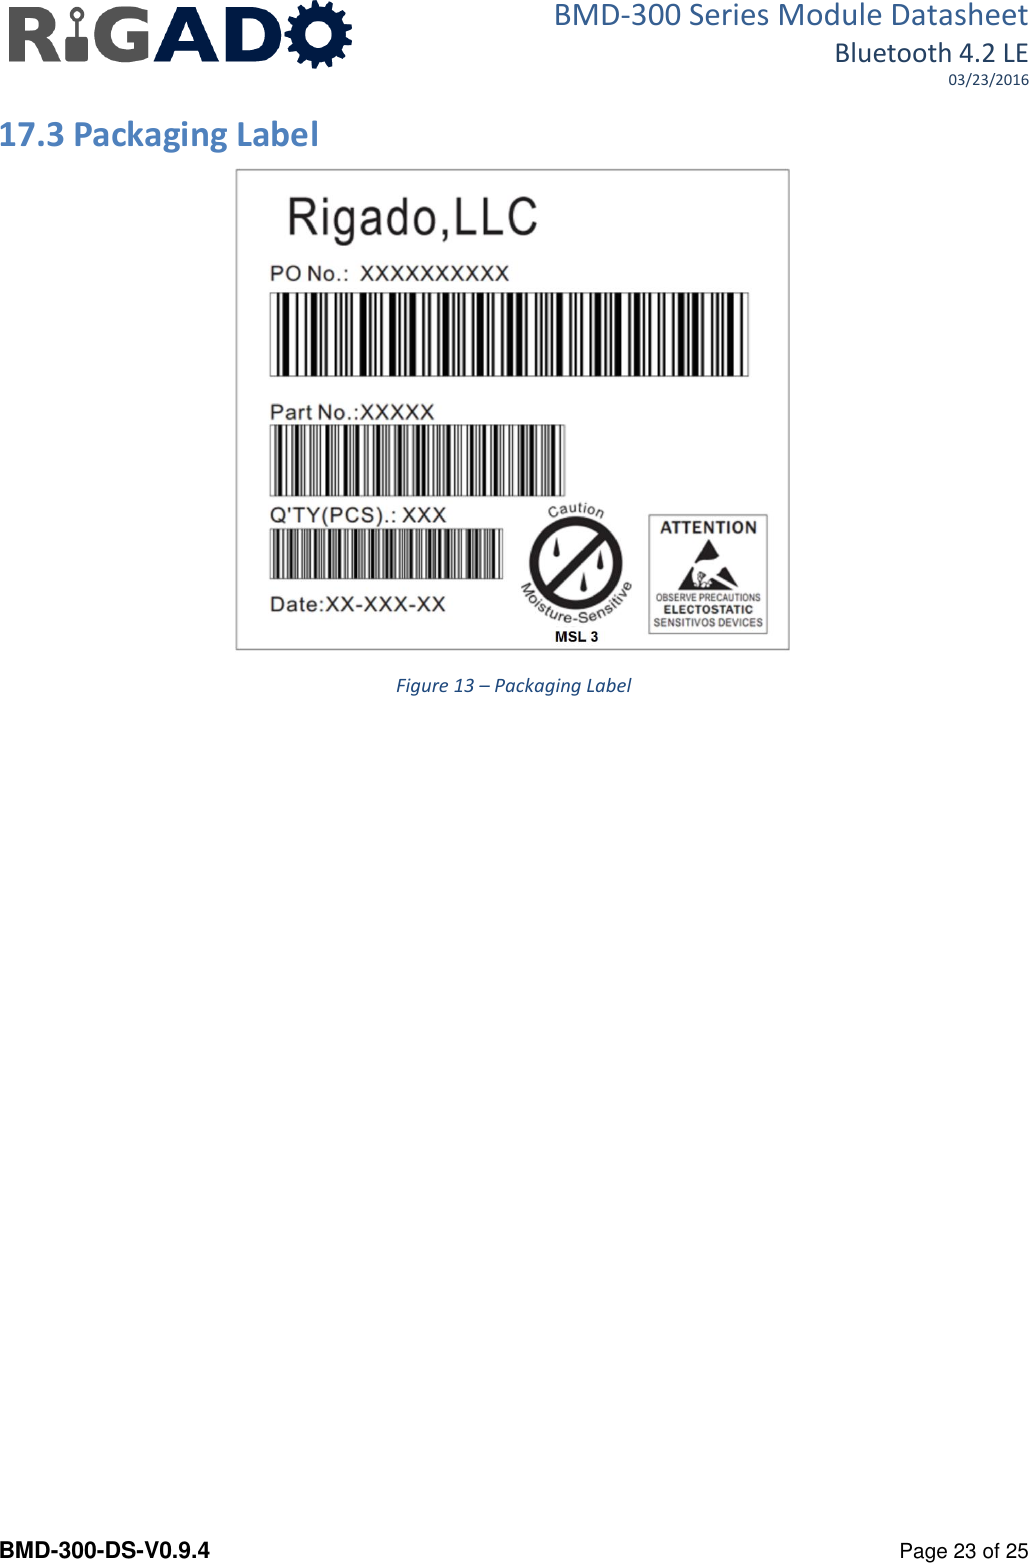 BMD-300 Series Module Datasheet Bluetooth 4.2 LE 03/23/2016  BMD-300-DS-V0.9.4      Page 23 of 25 17.3 Packaging Label  Figure 13 – Packaging Label     